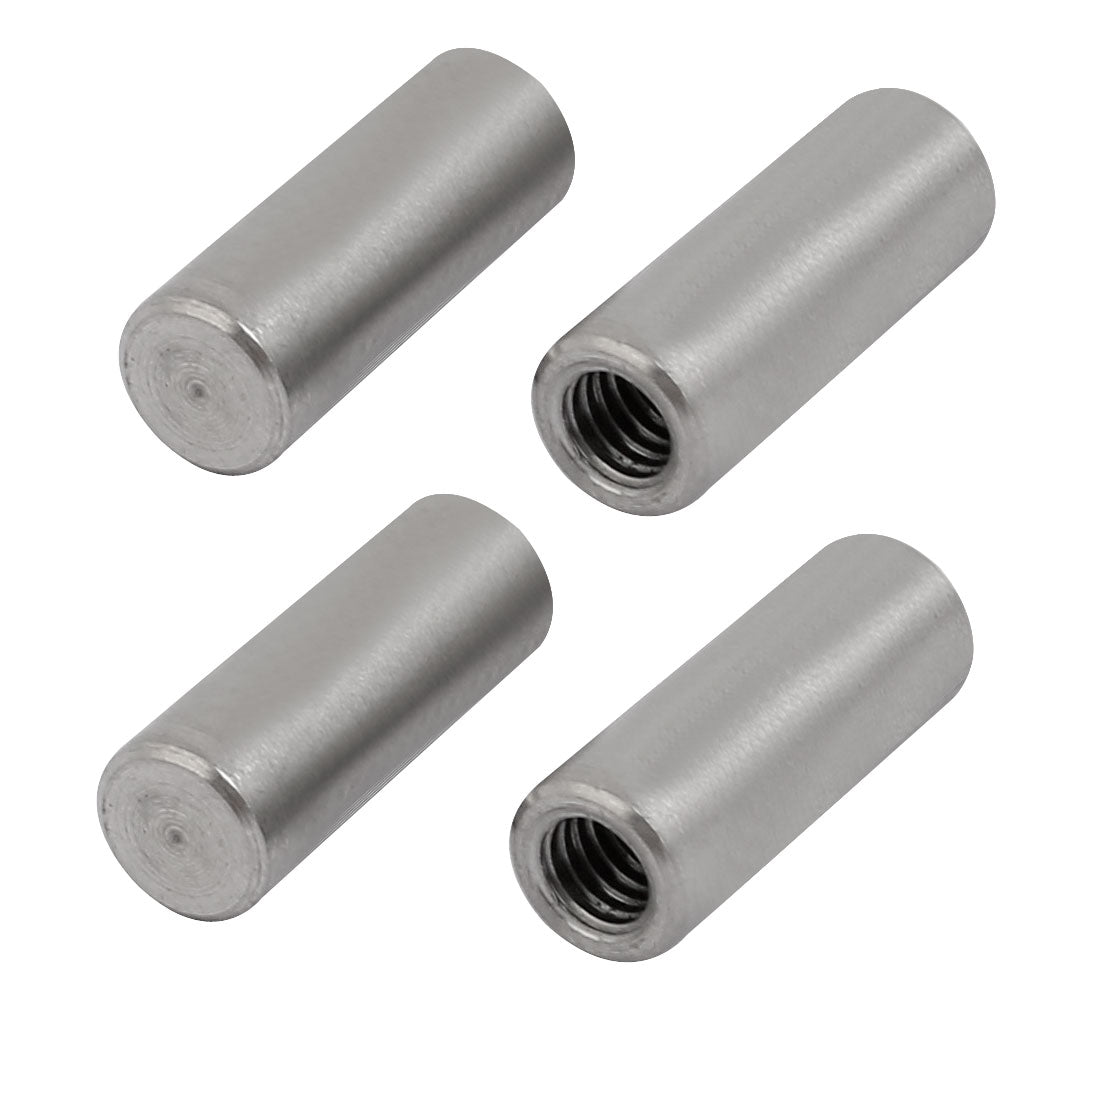 uxcell Uxcell 304 Stainless Steel M4 Female Thread 6mm x 16mm Cylindrical Dowel Pin 4pcs